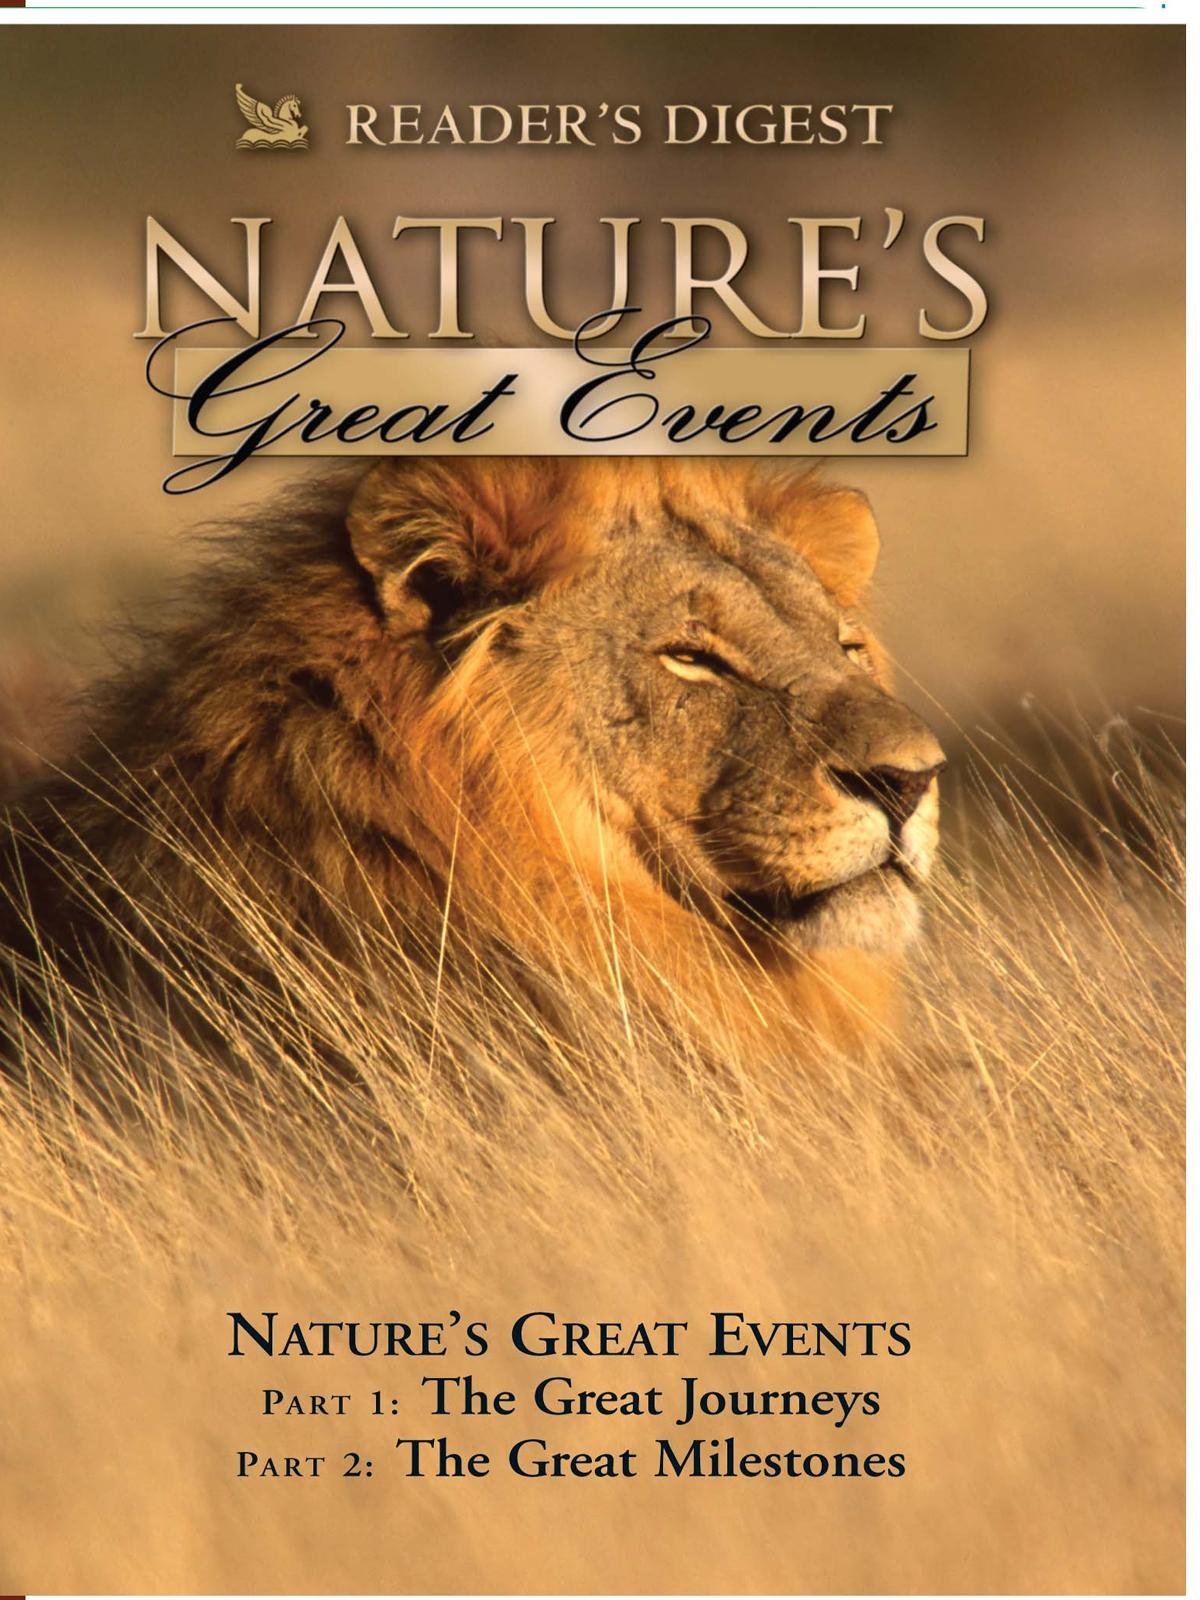 Nature's Great Events: The Great Journeys